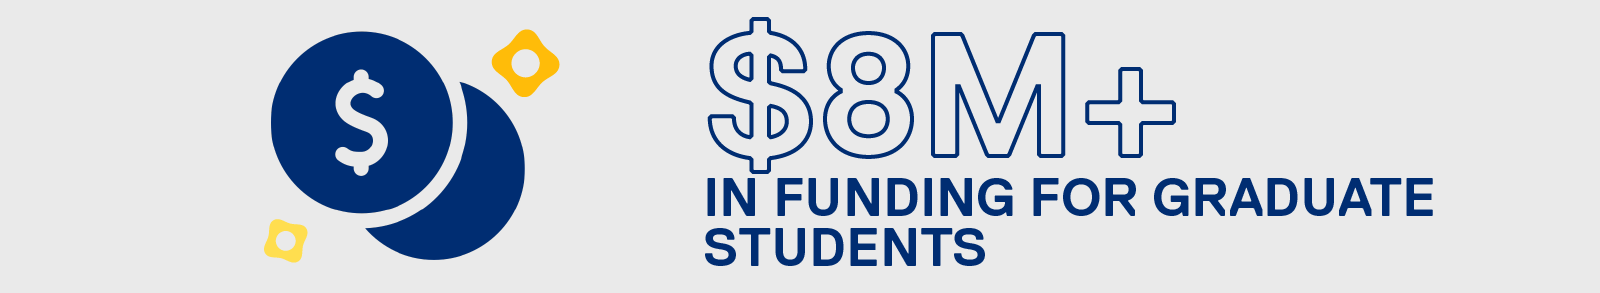 Eight million dollars plus in funding for graduate students